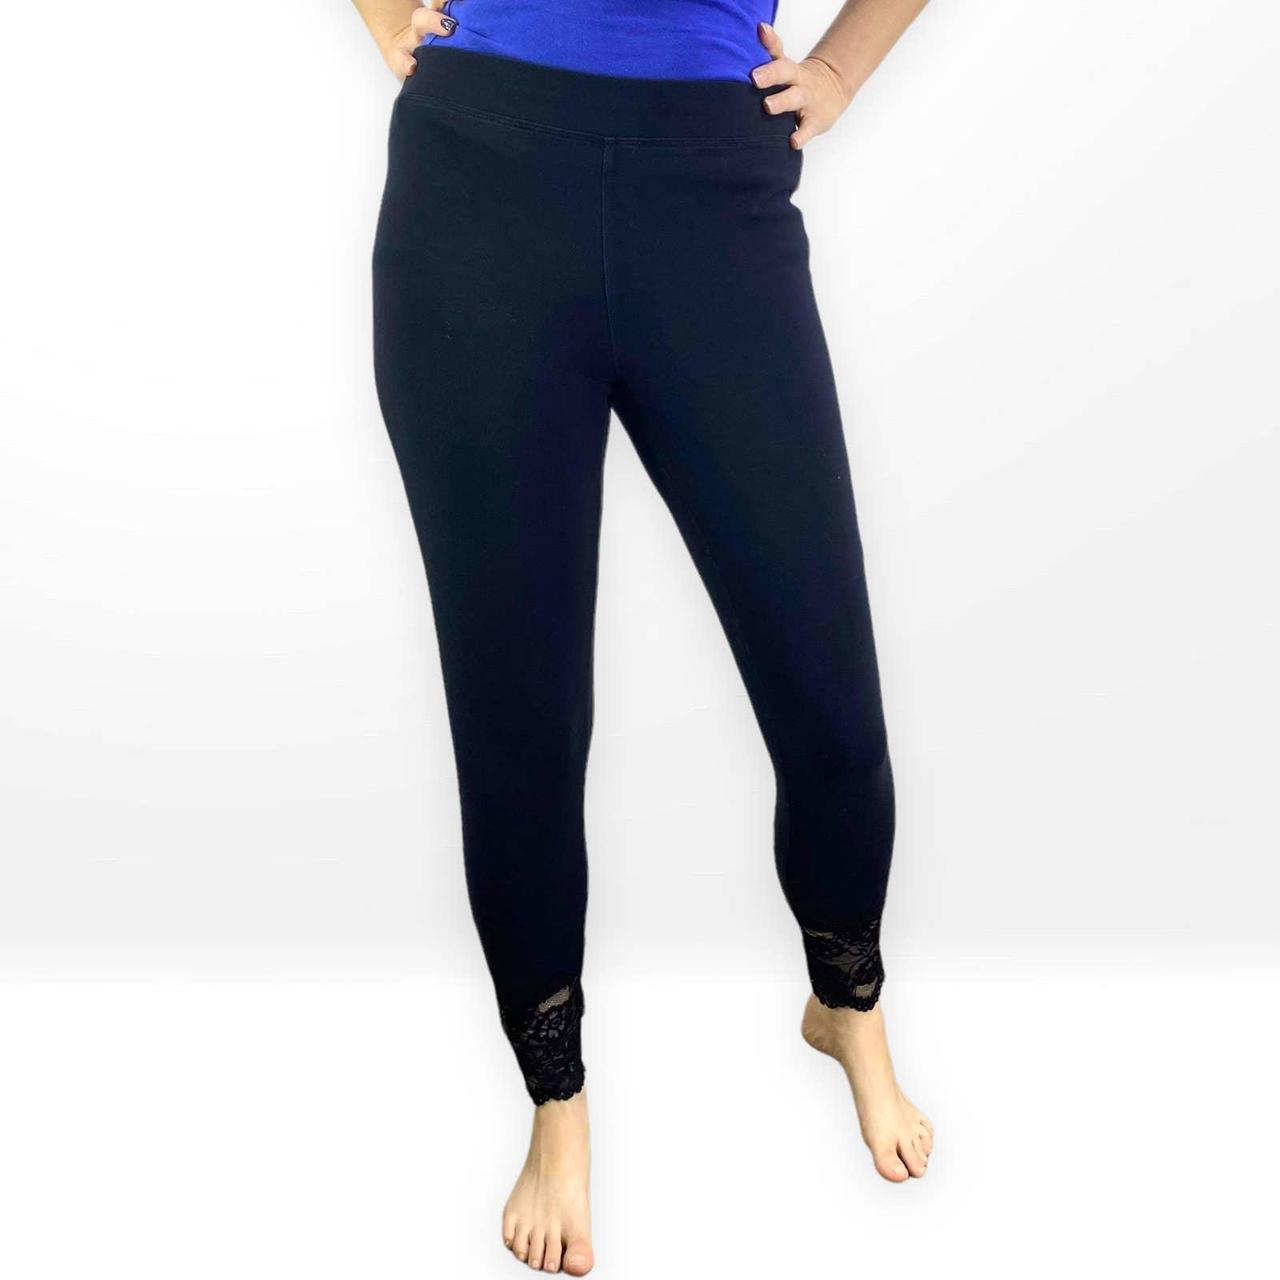 Express Super High Waisted Ankle Zip Leggings | Stylemi